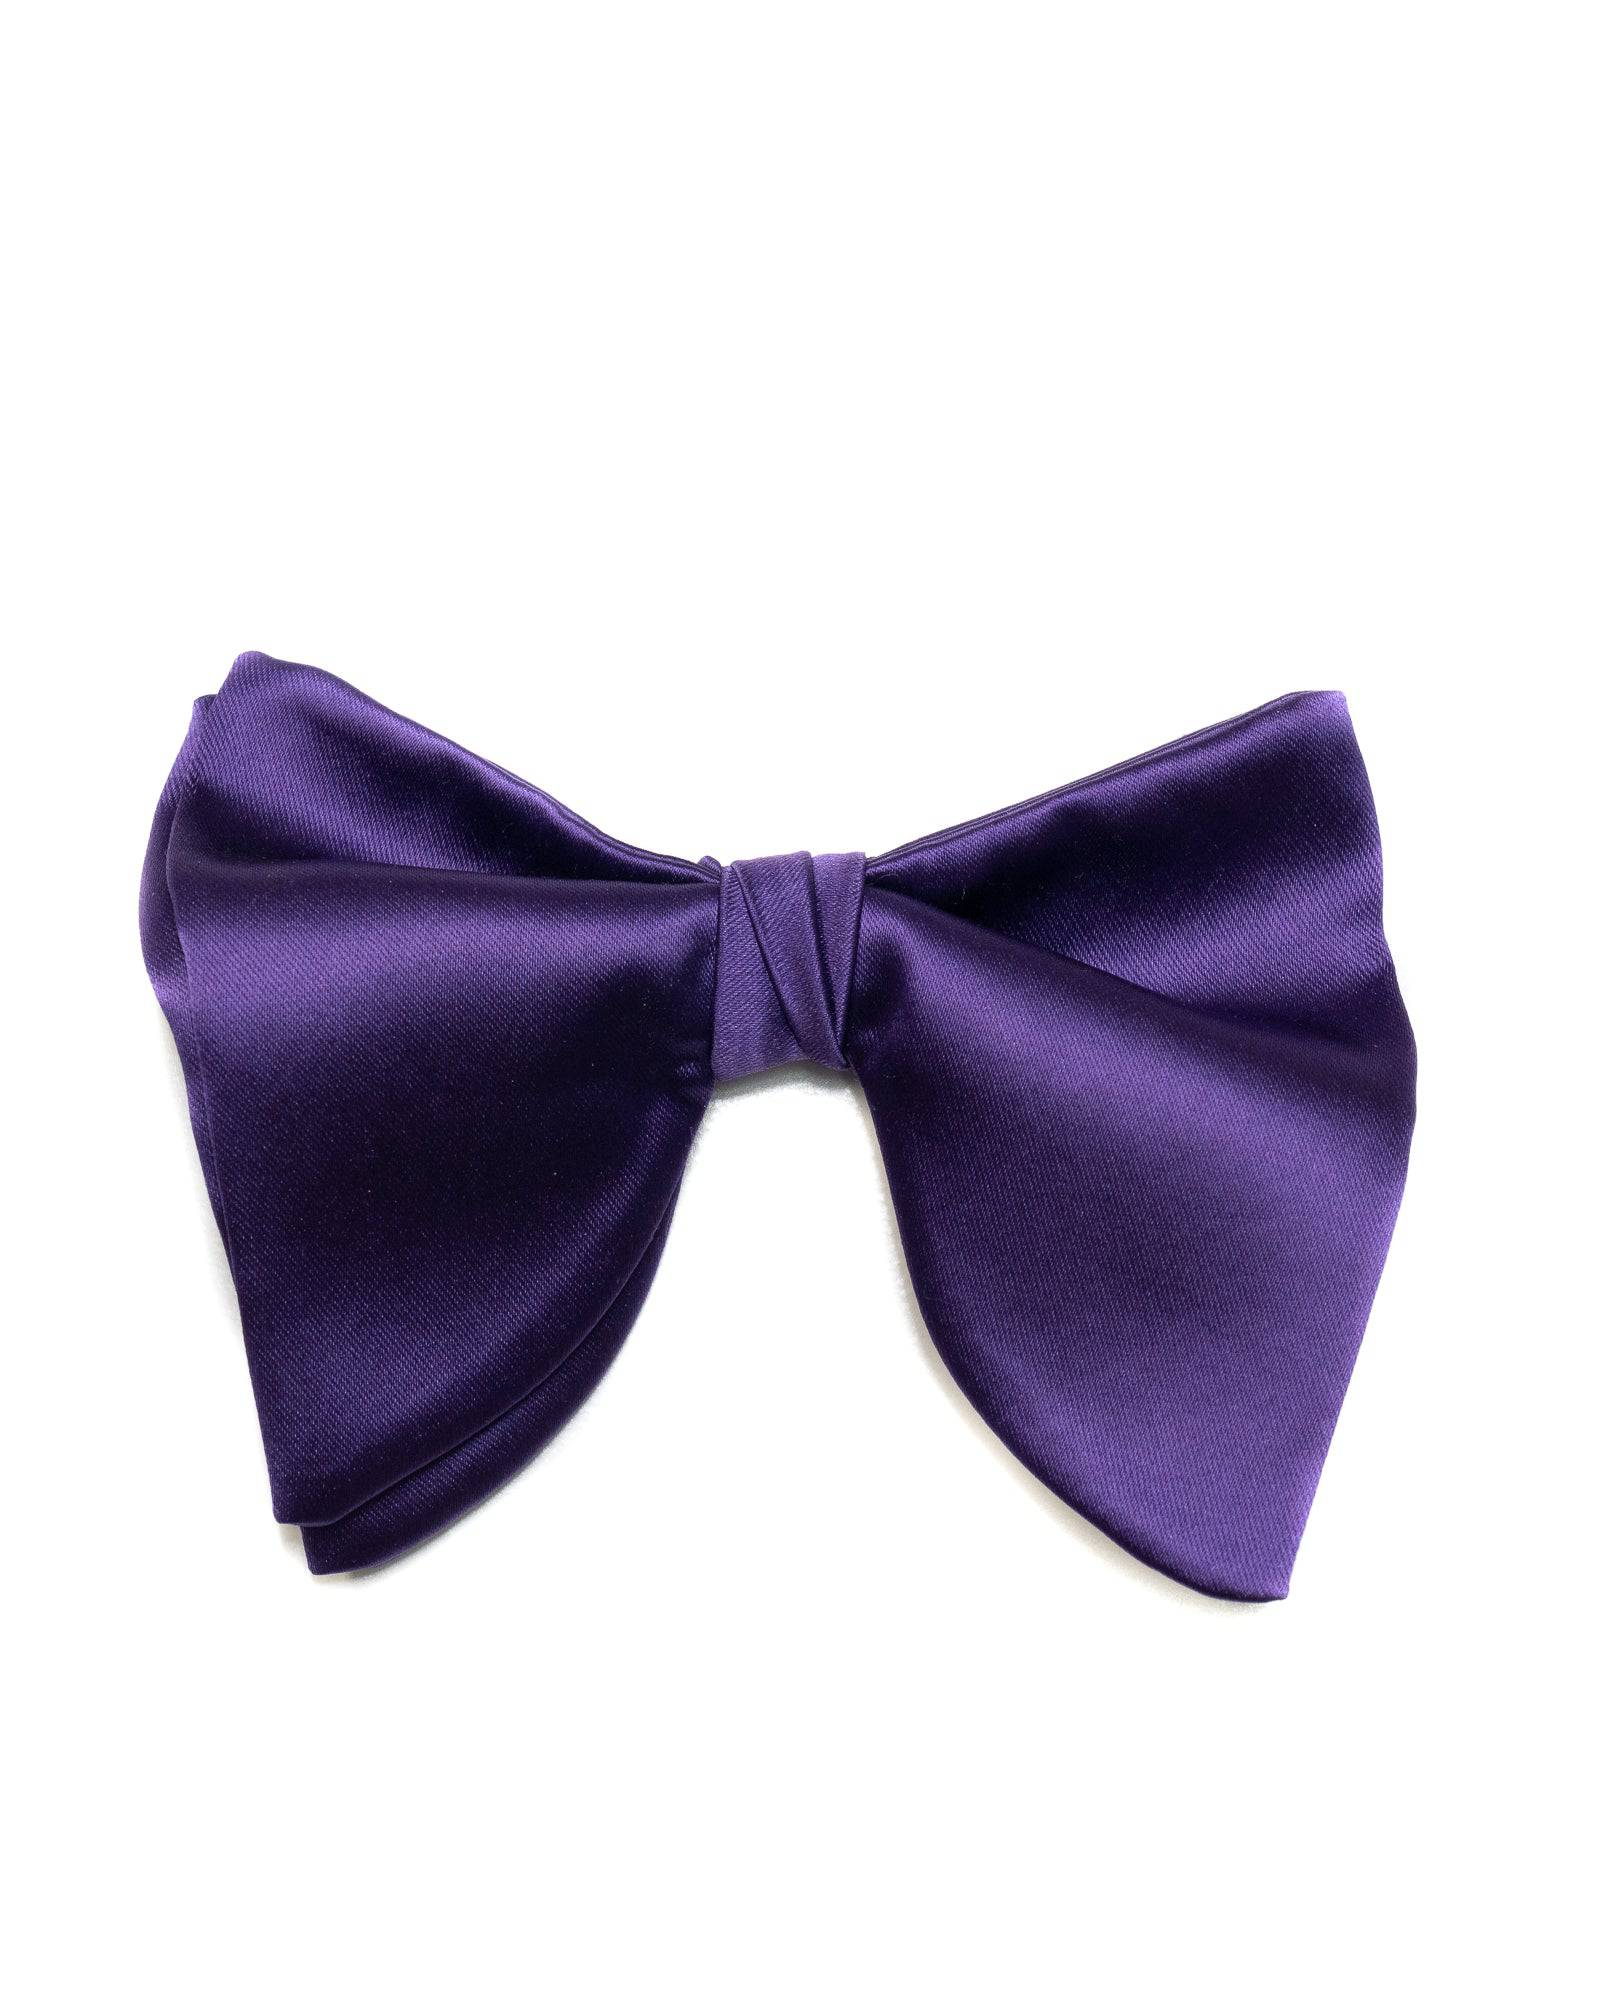 Bow Tie In Butterfly Shape Solid Satin Purple - Rainwater's Men's Clothing and Tuxedo Rental